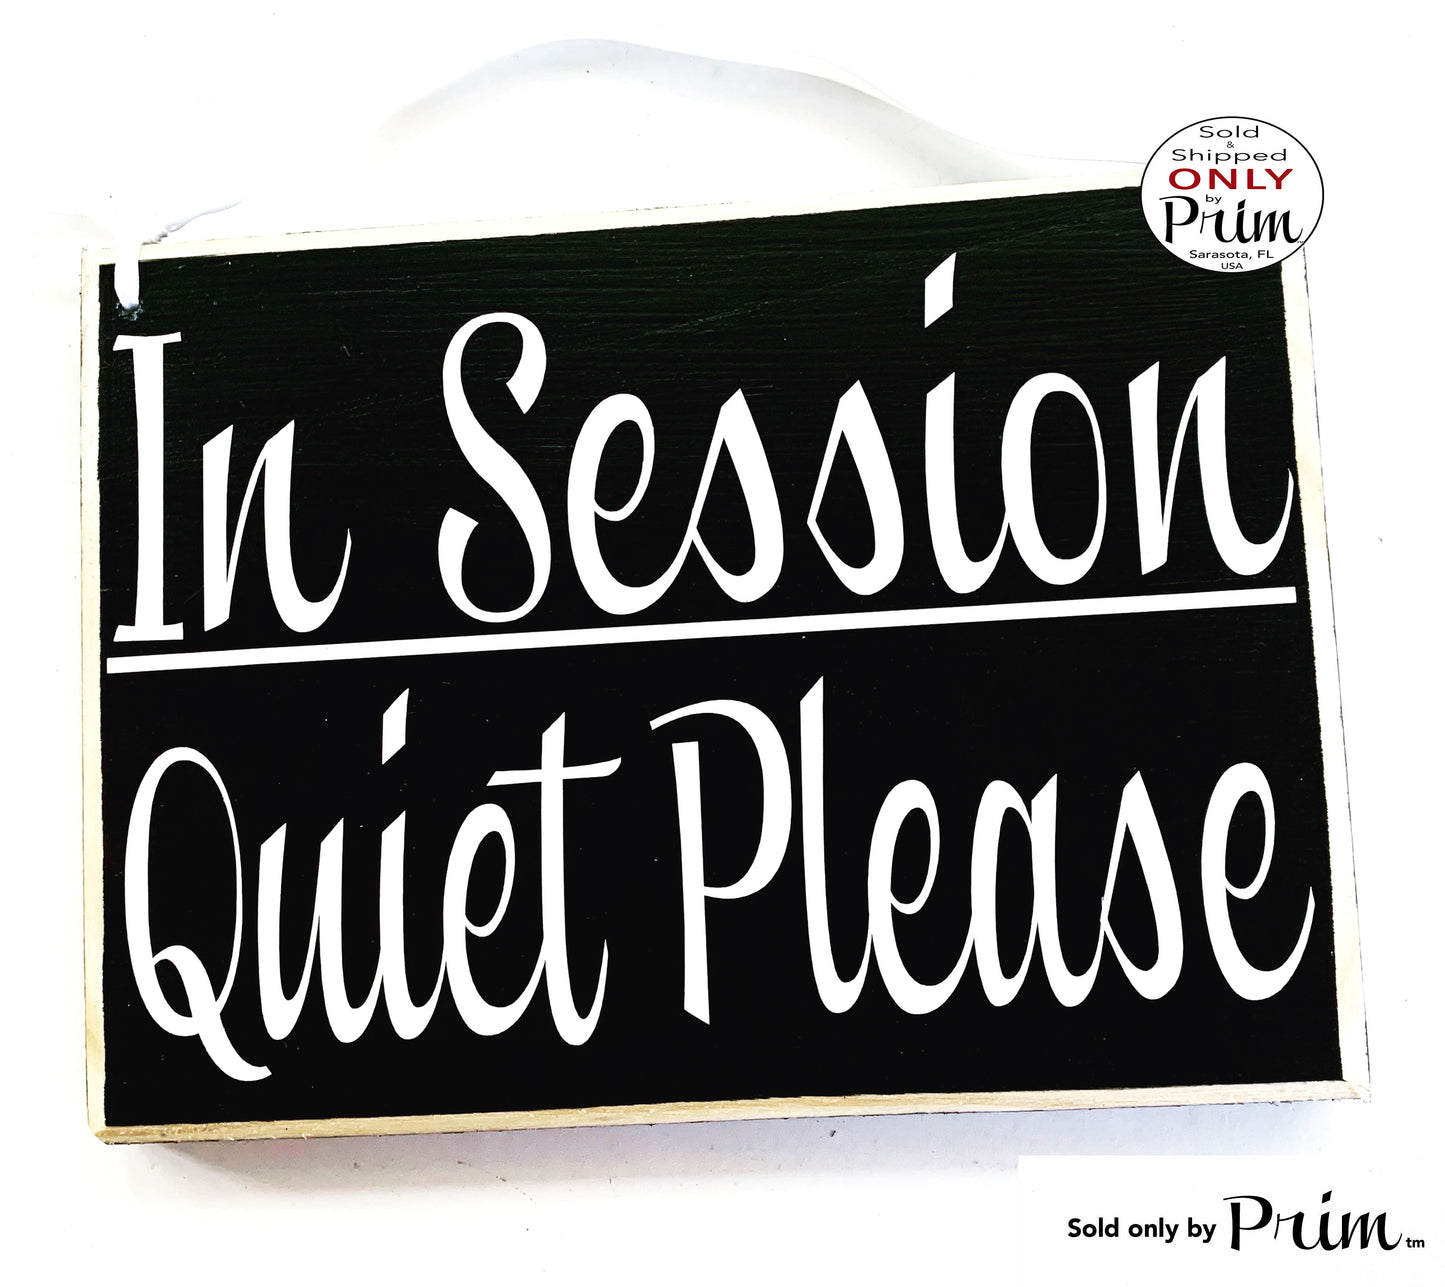 10x8 In Session Quiet Please Custom Wood Sign In Progress Please Do Not Disturb Shhh Soft Voices Massage Spa Service Facial Waxing Salon Designs by Prim